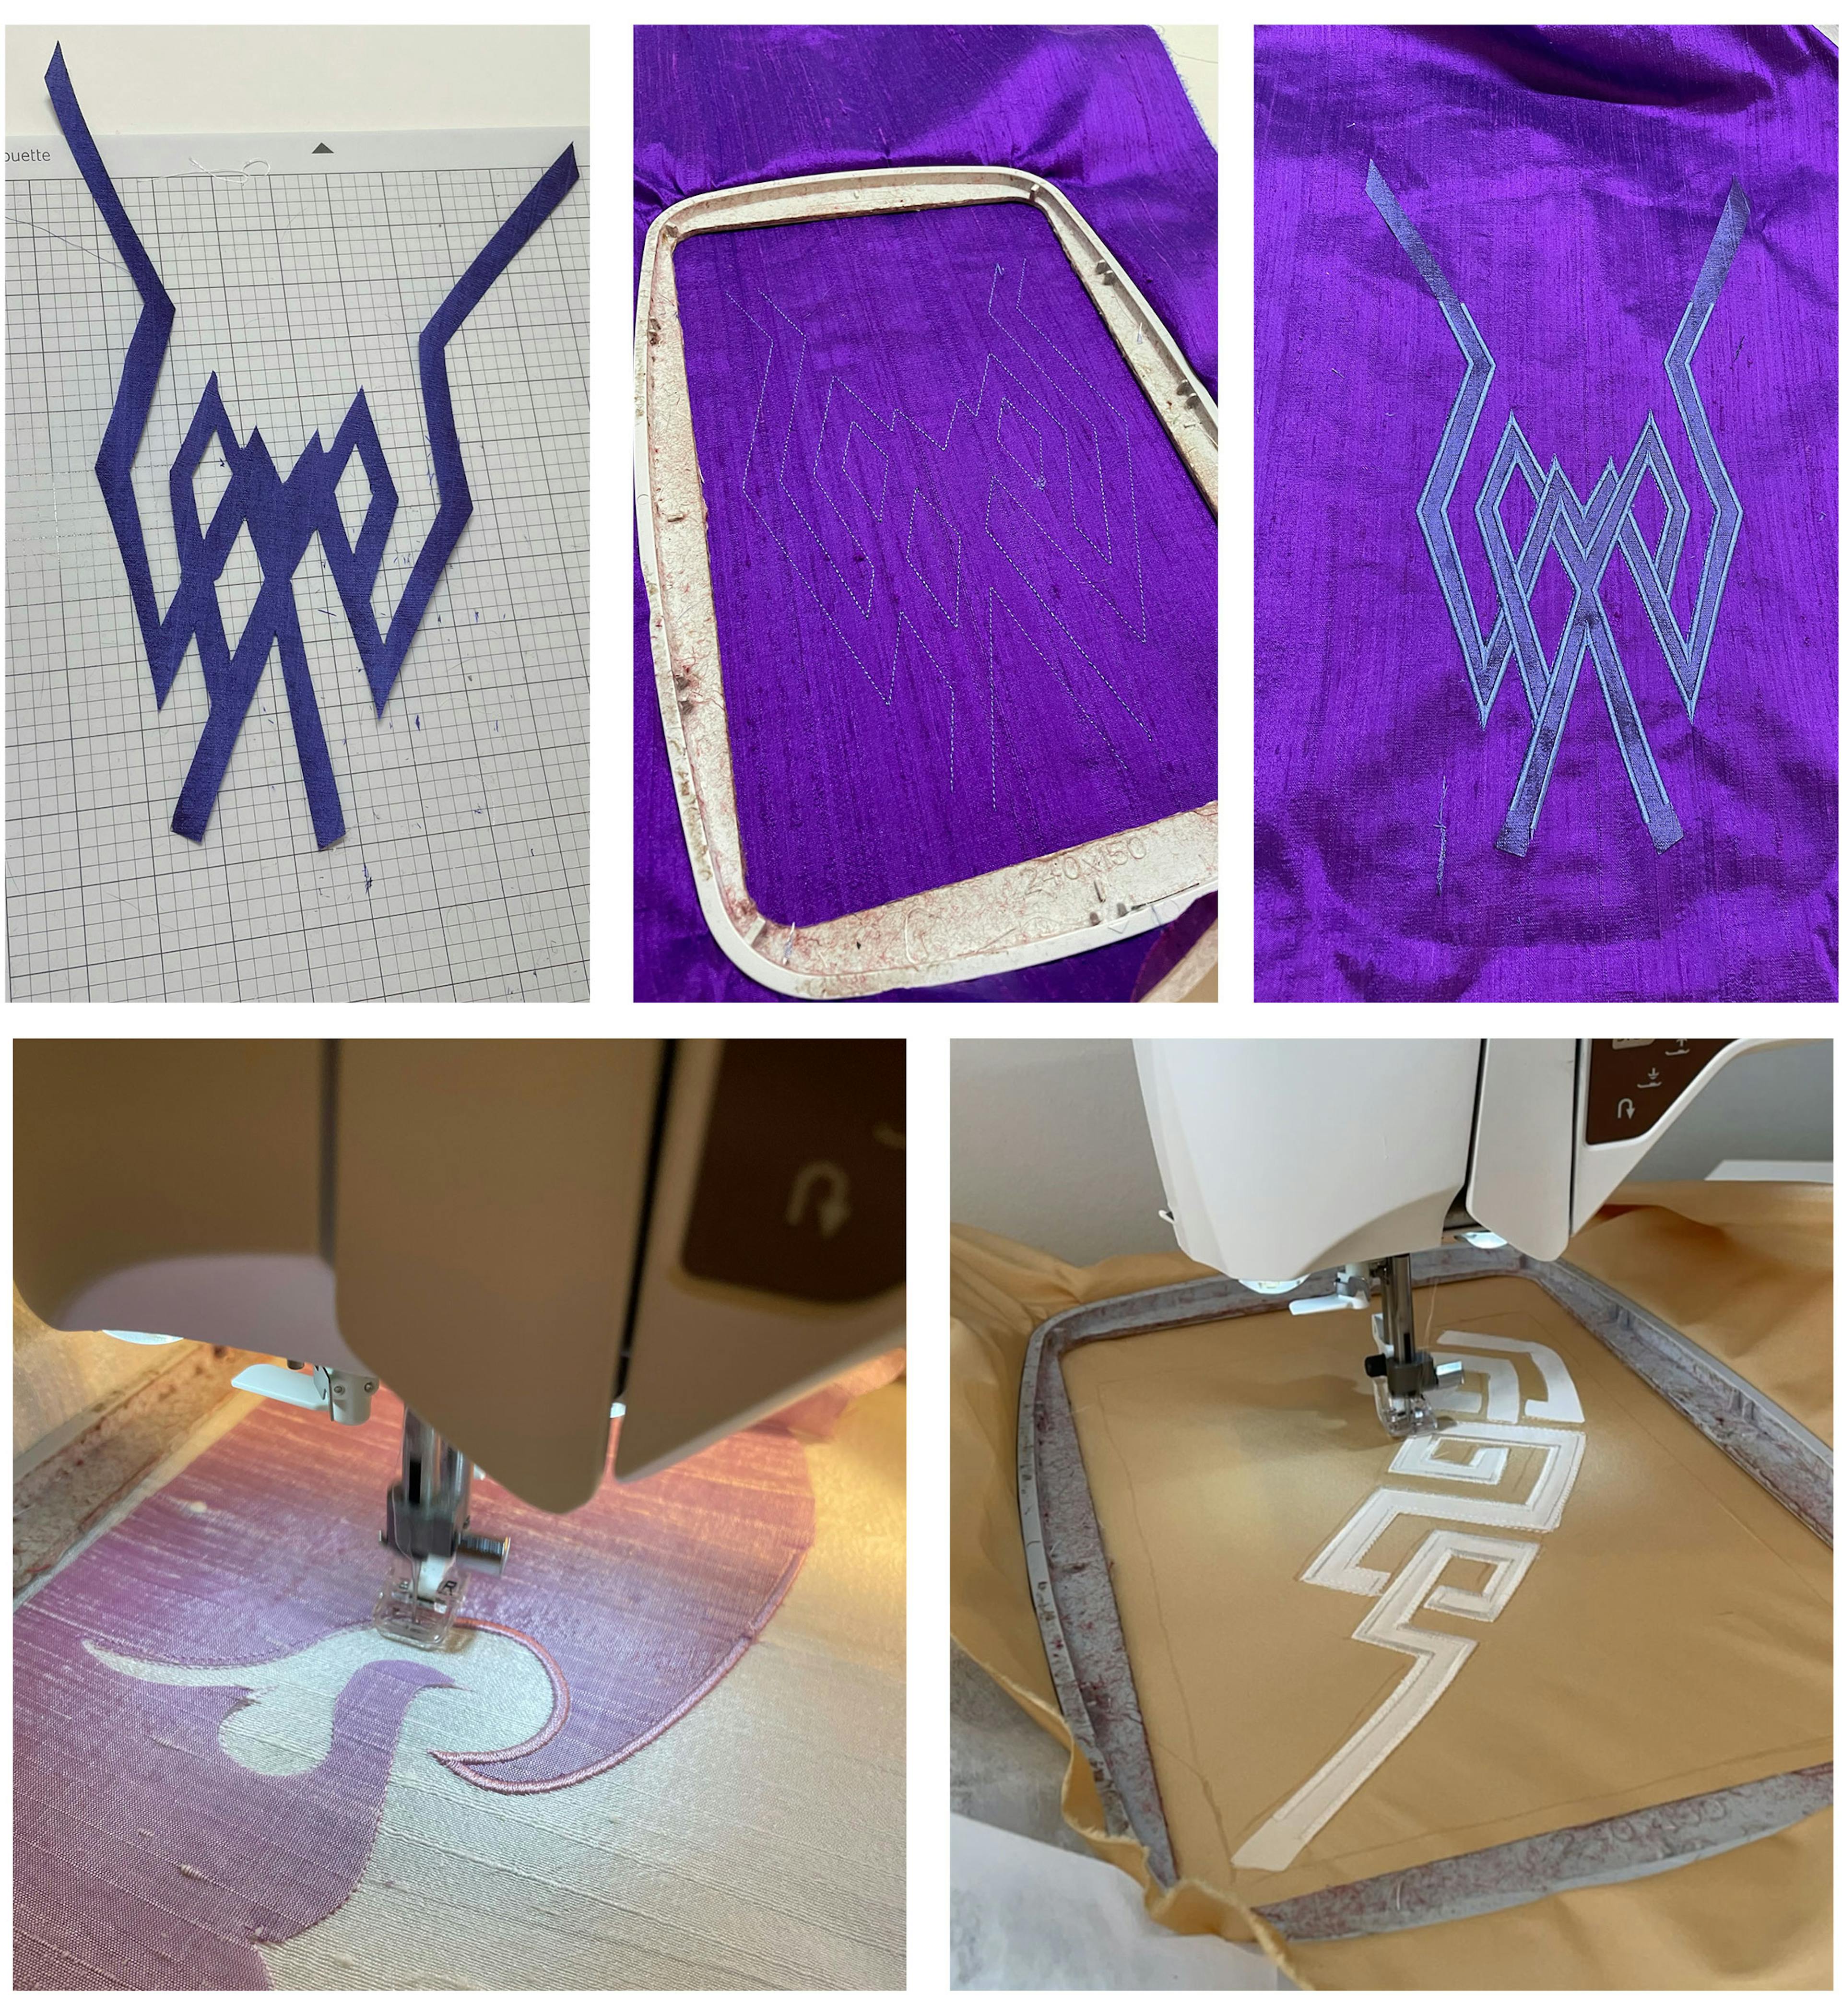 Keqing cosplay construction details embroidery